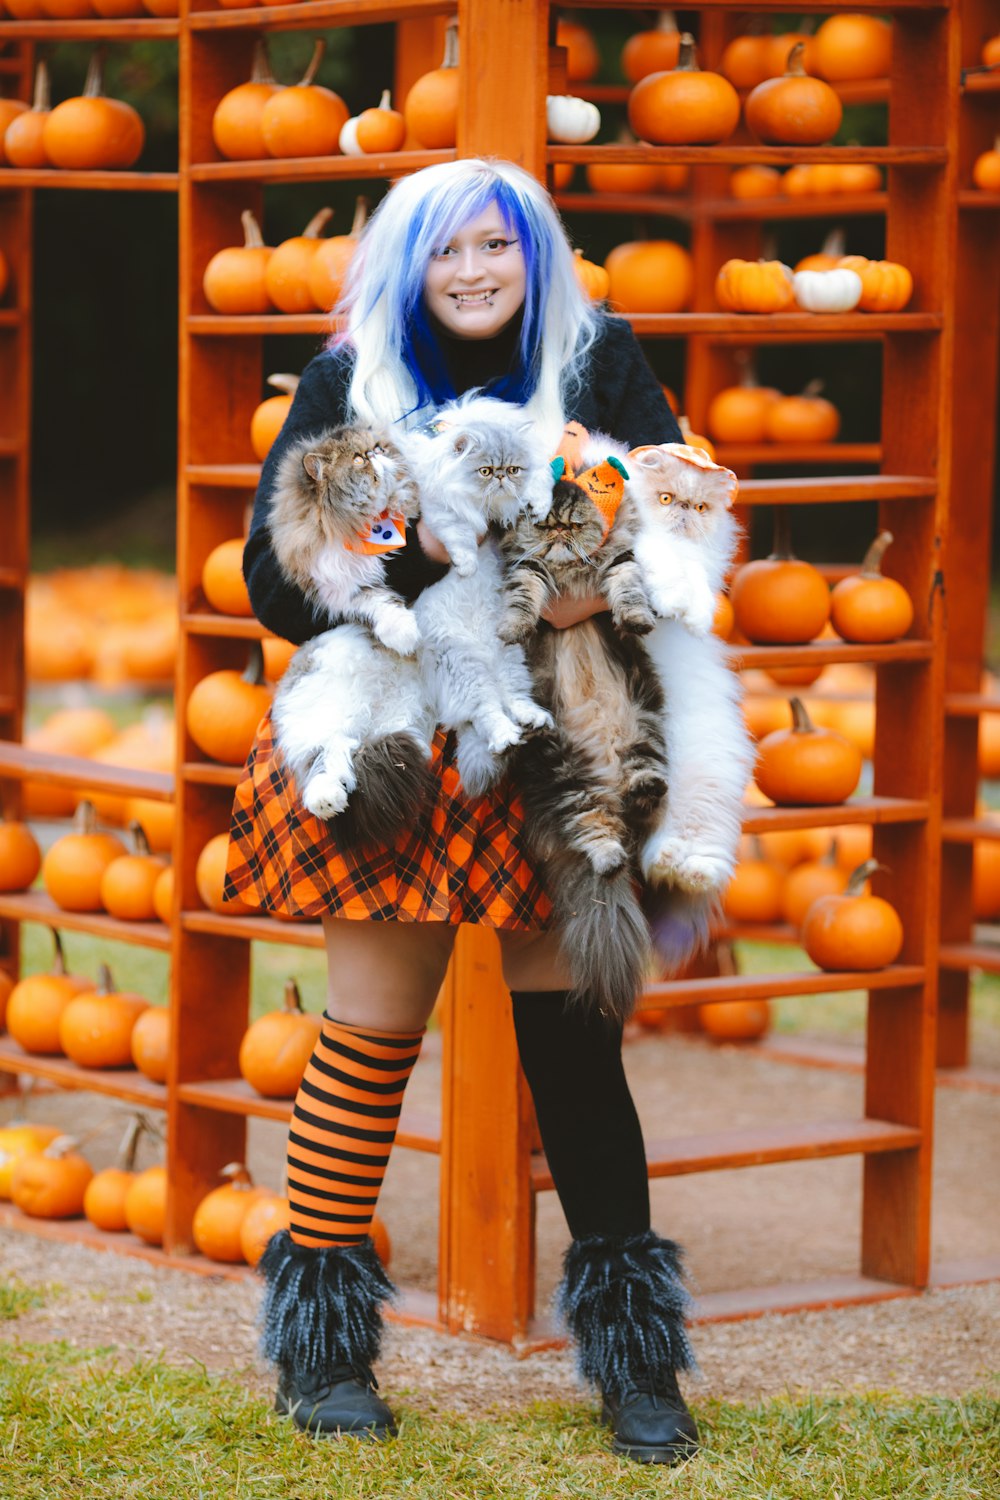 a woman with blue hair holding two cats